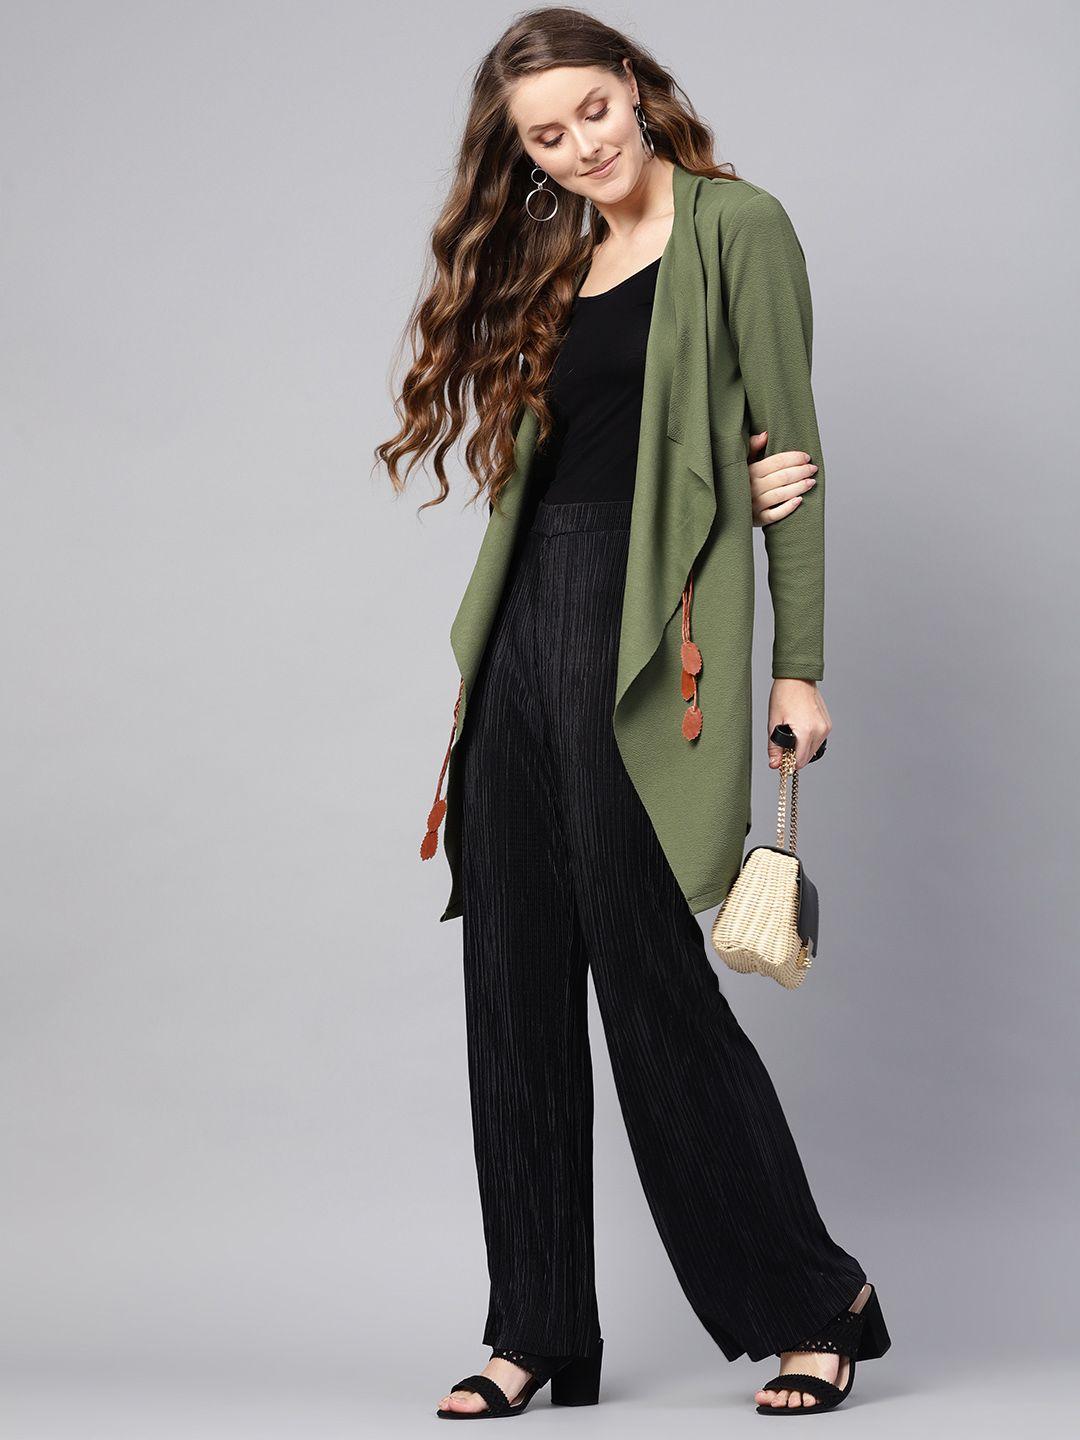 sassafras women olive green solid longline waterfall shrug with tie-up